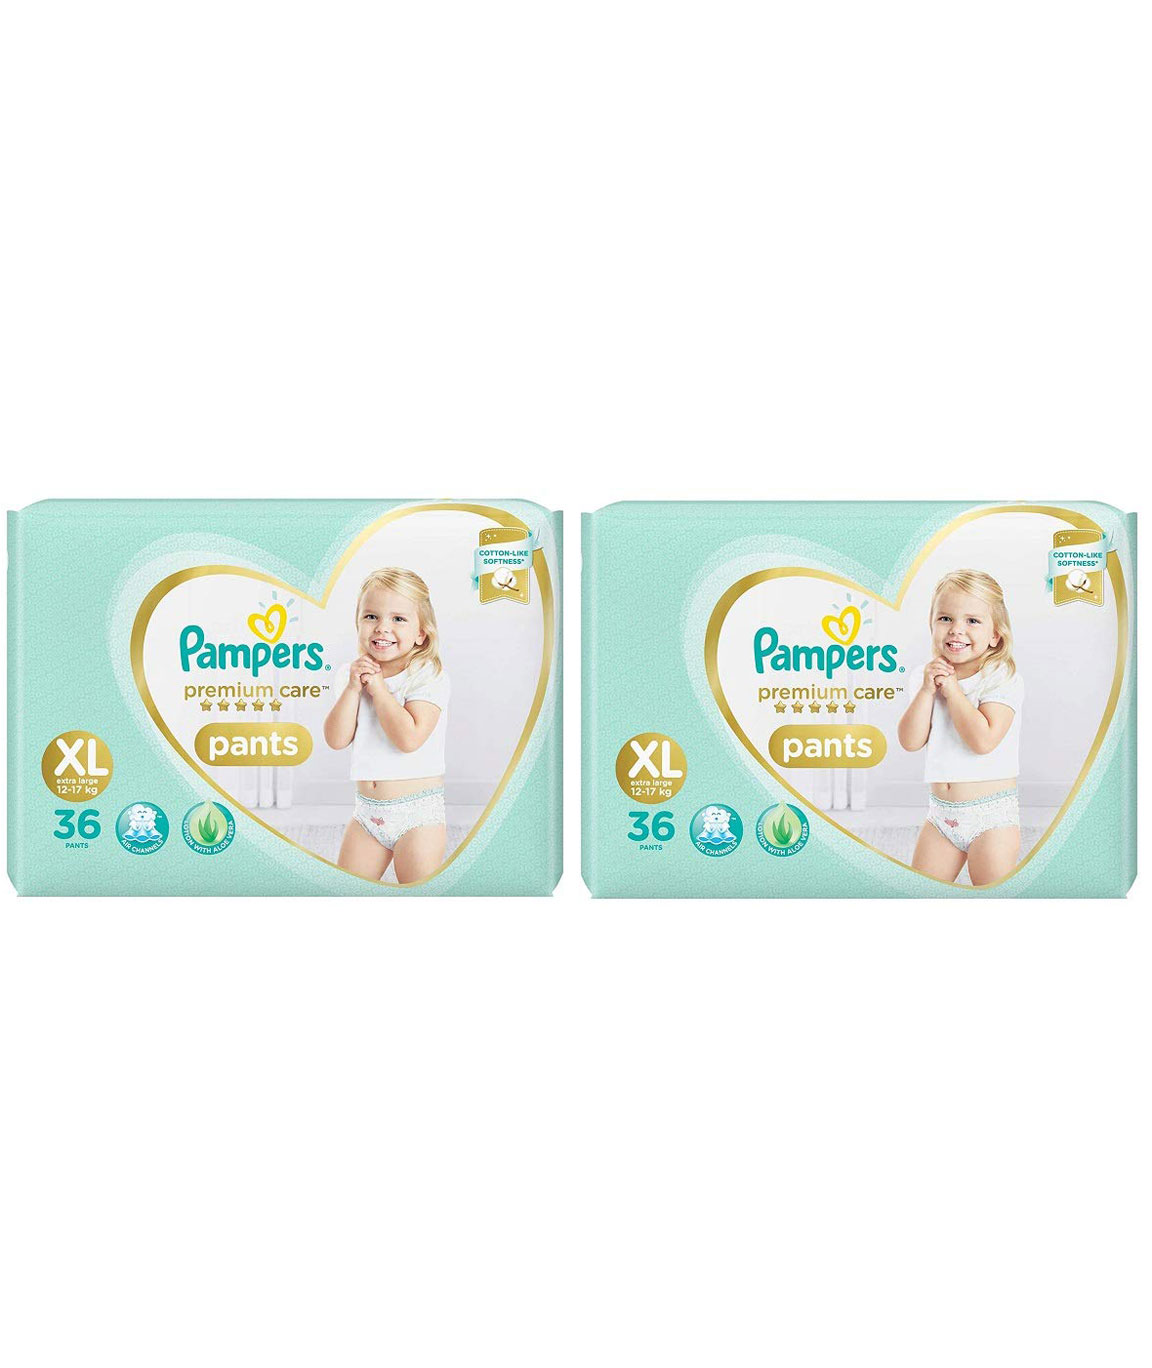 Buy Mamypoko Pants Extra Absorb Diaper, X-Large (Pack of 54) for Kids  Online at Low Prices in India - Amazon.in